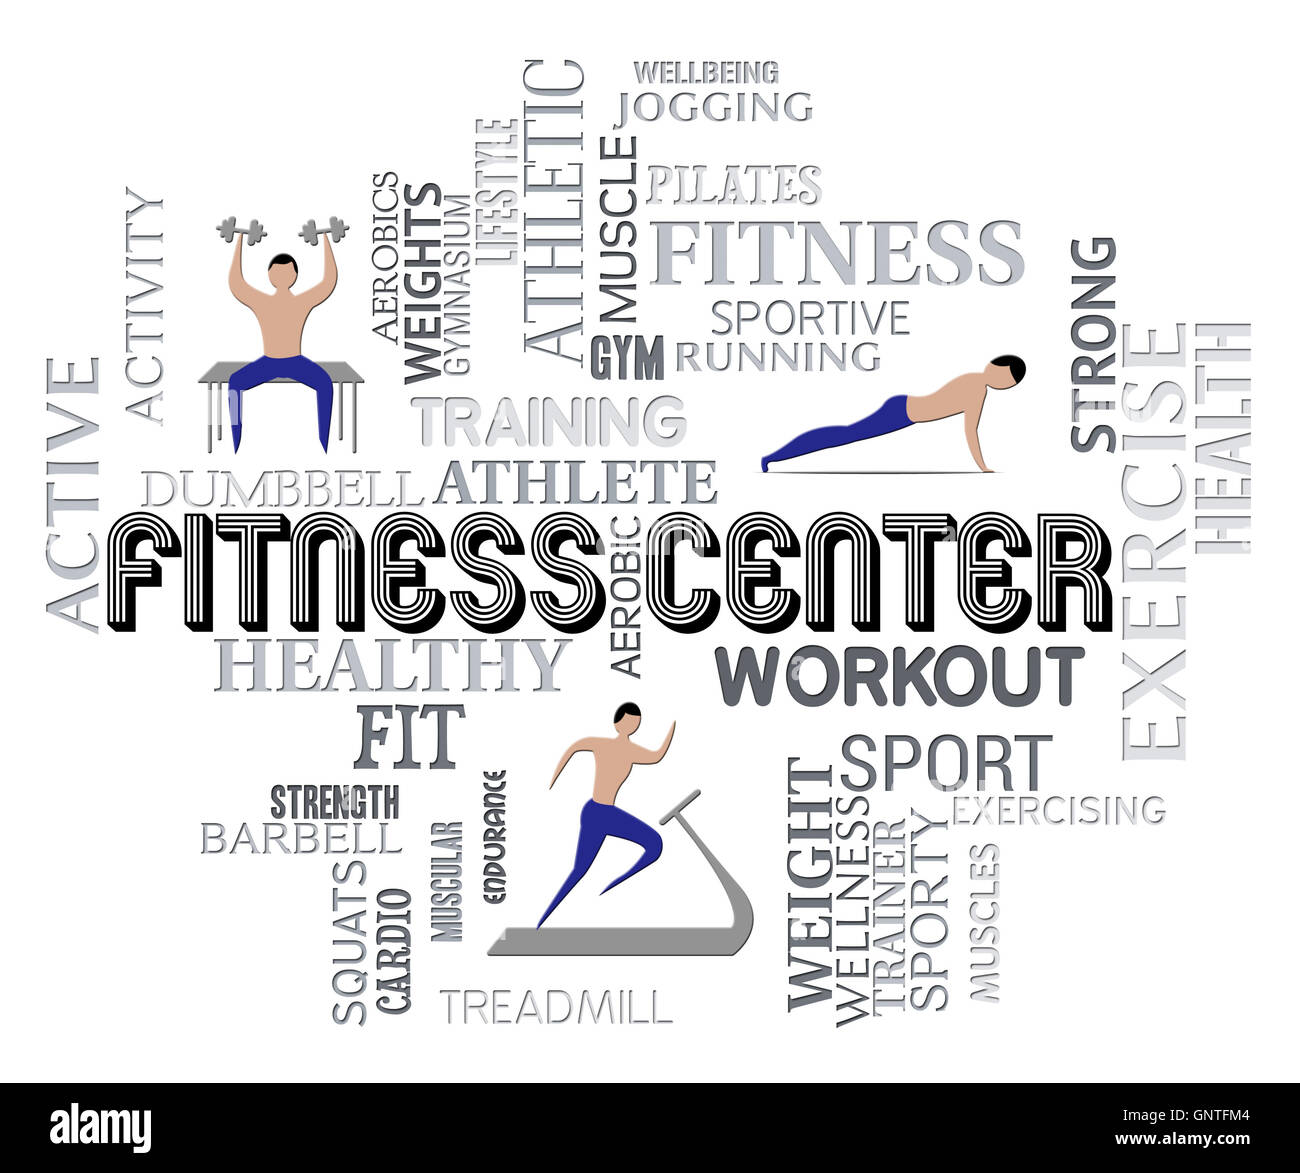 https://c8.alamy.com/comp/GNTFM4/fitness-center-meaning-work-out-and-getting-fit-GNTFM4.jpg